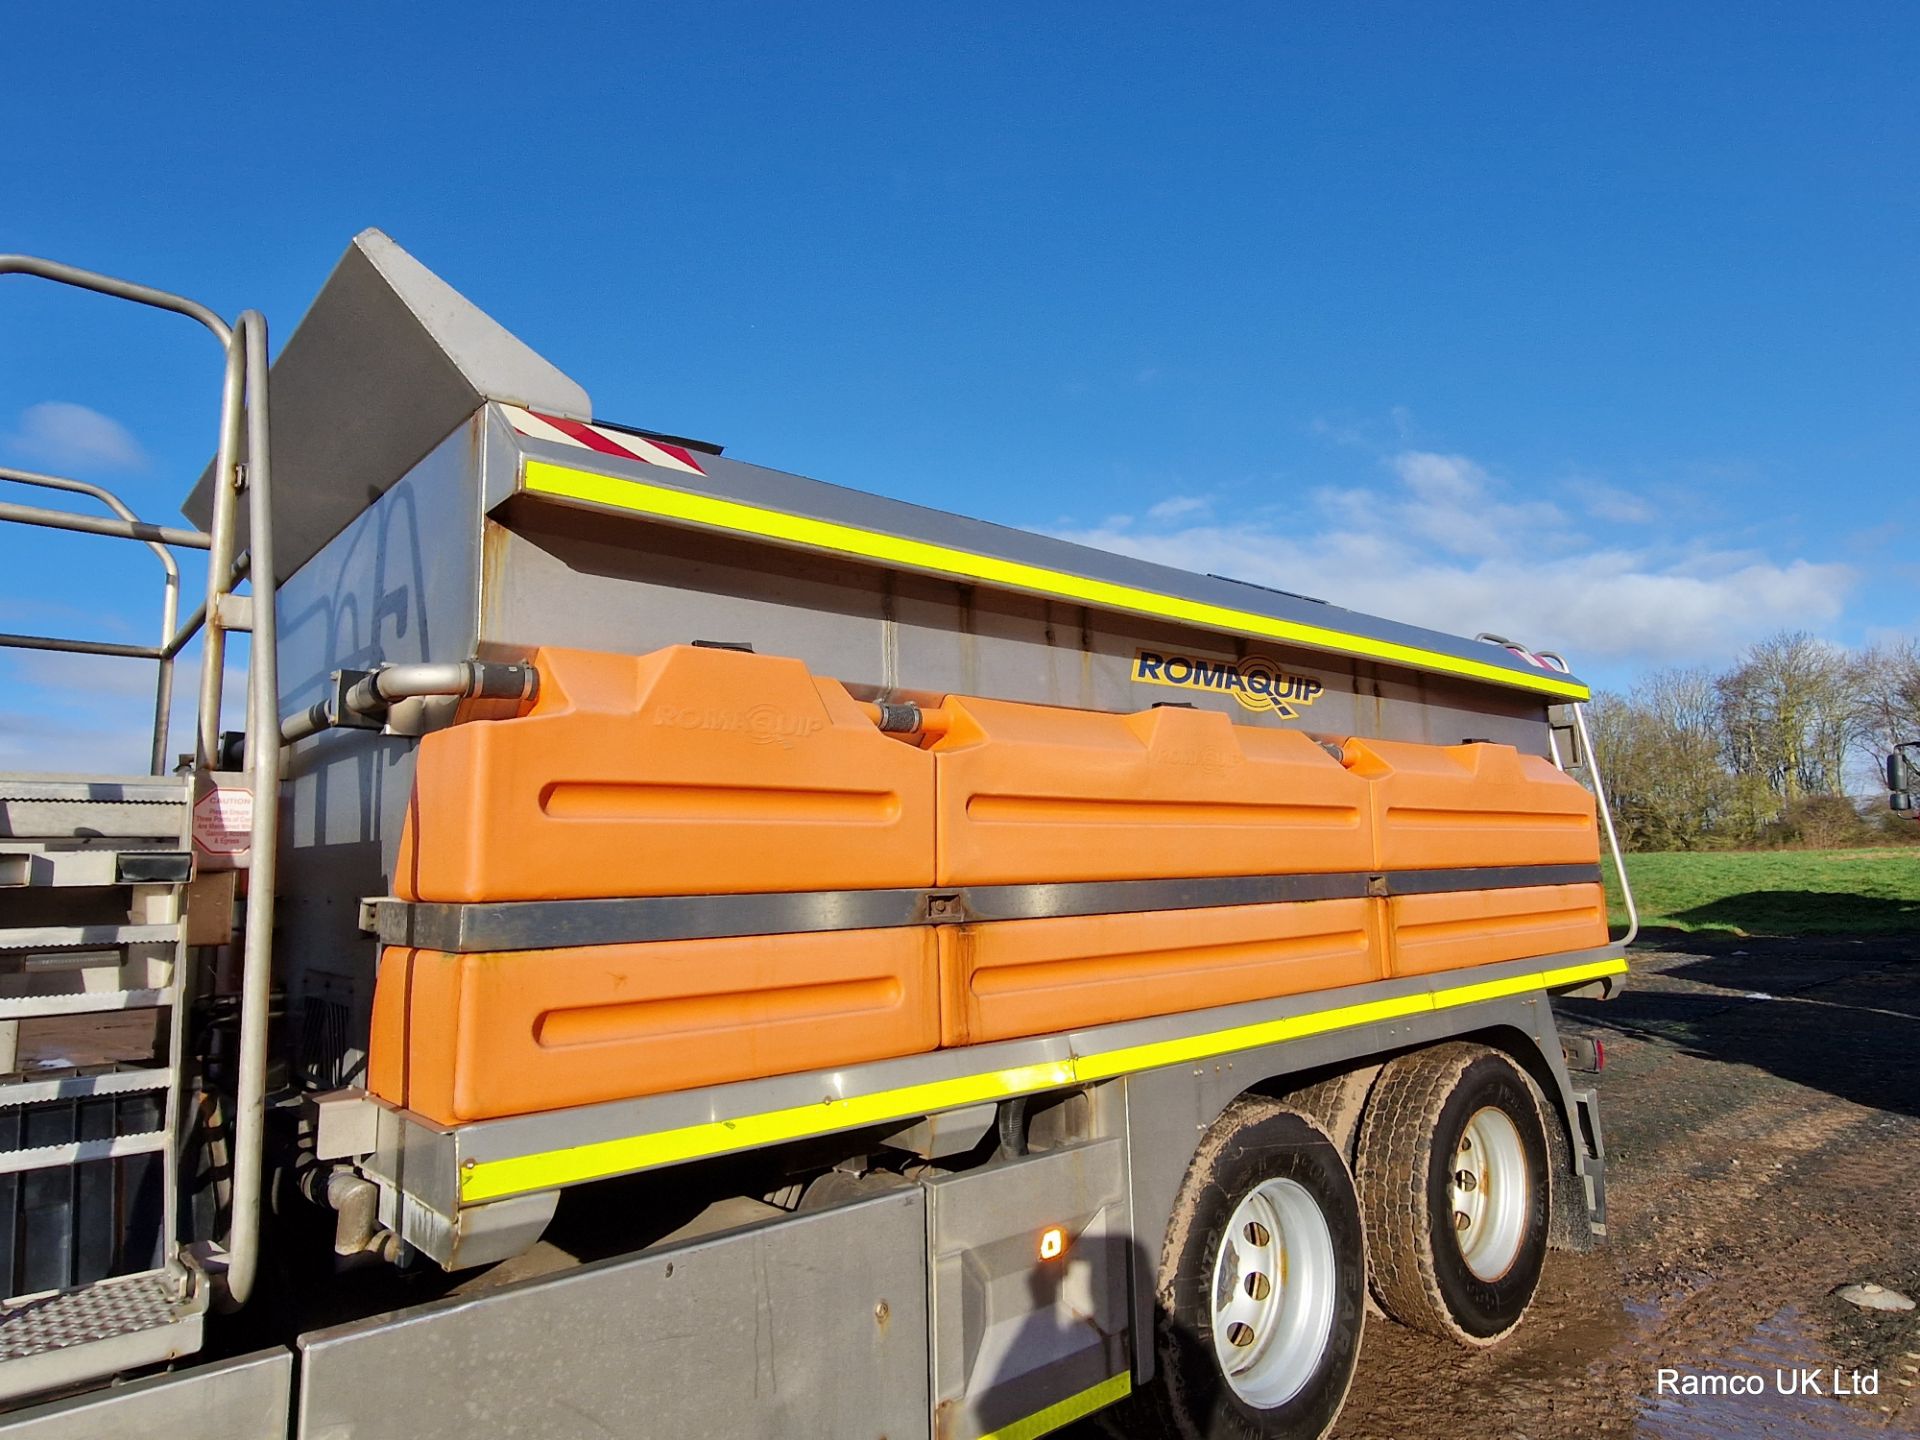 2009 (reg GN09 OUY) MAN TGM 26.330 6x4 with Romaquip wet gritter mount. - Image 4 of 15